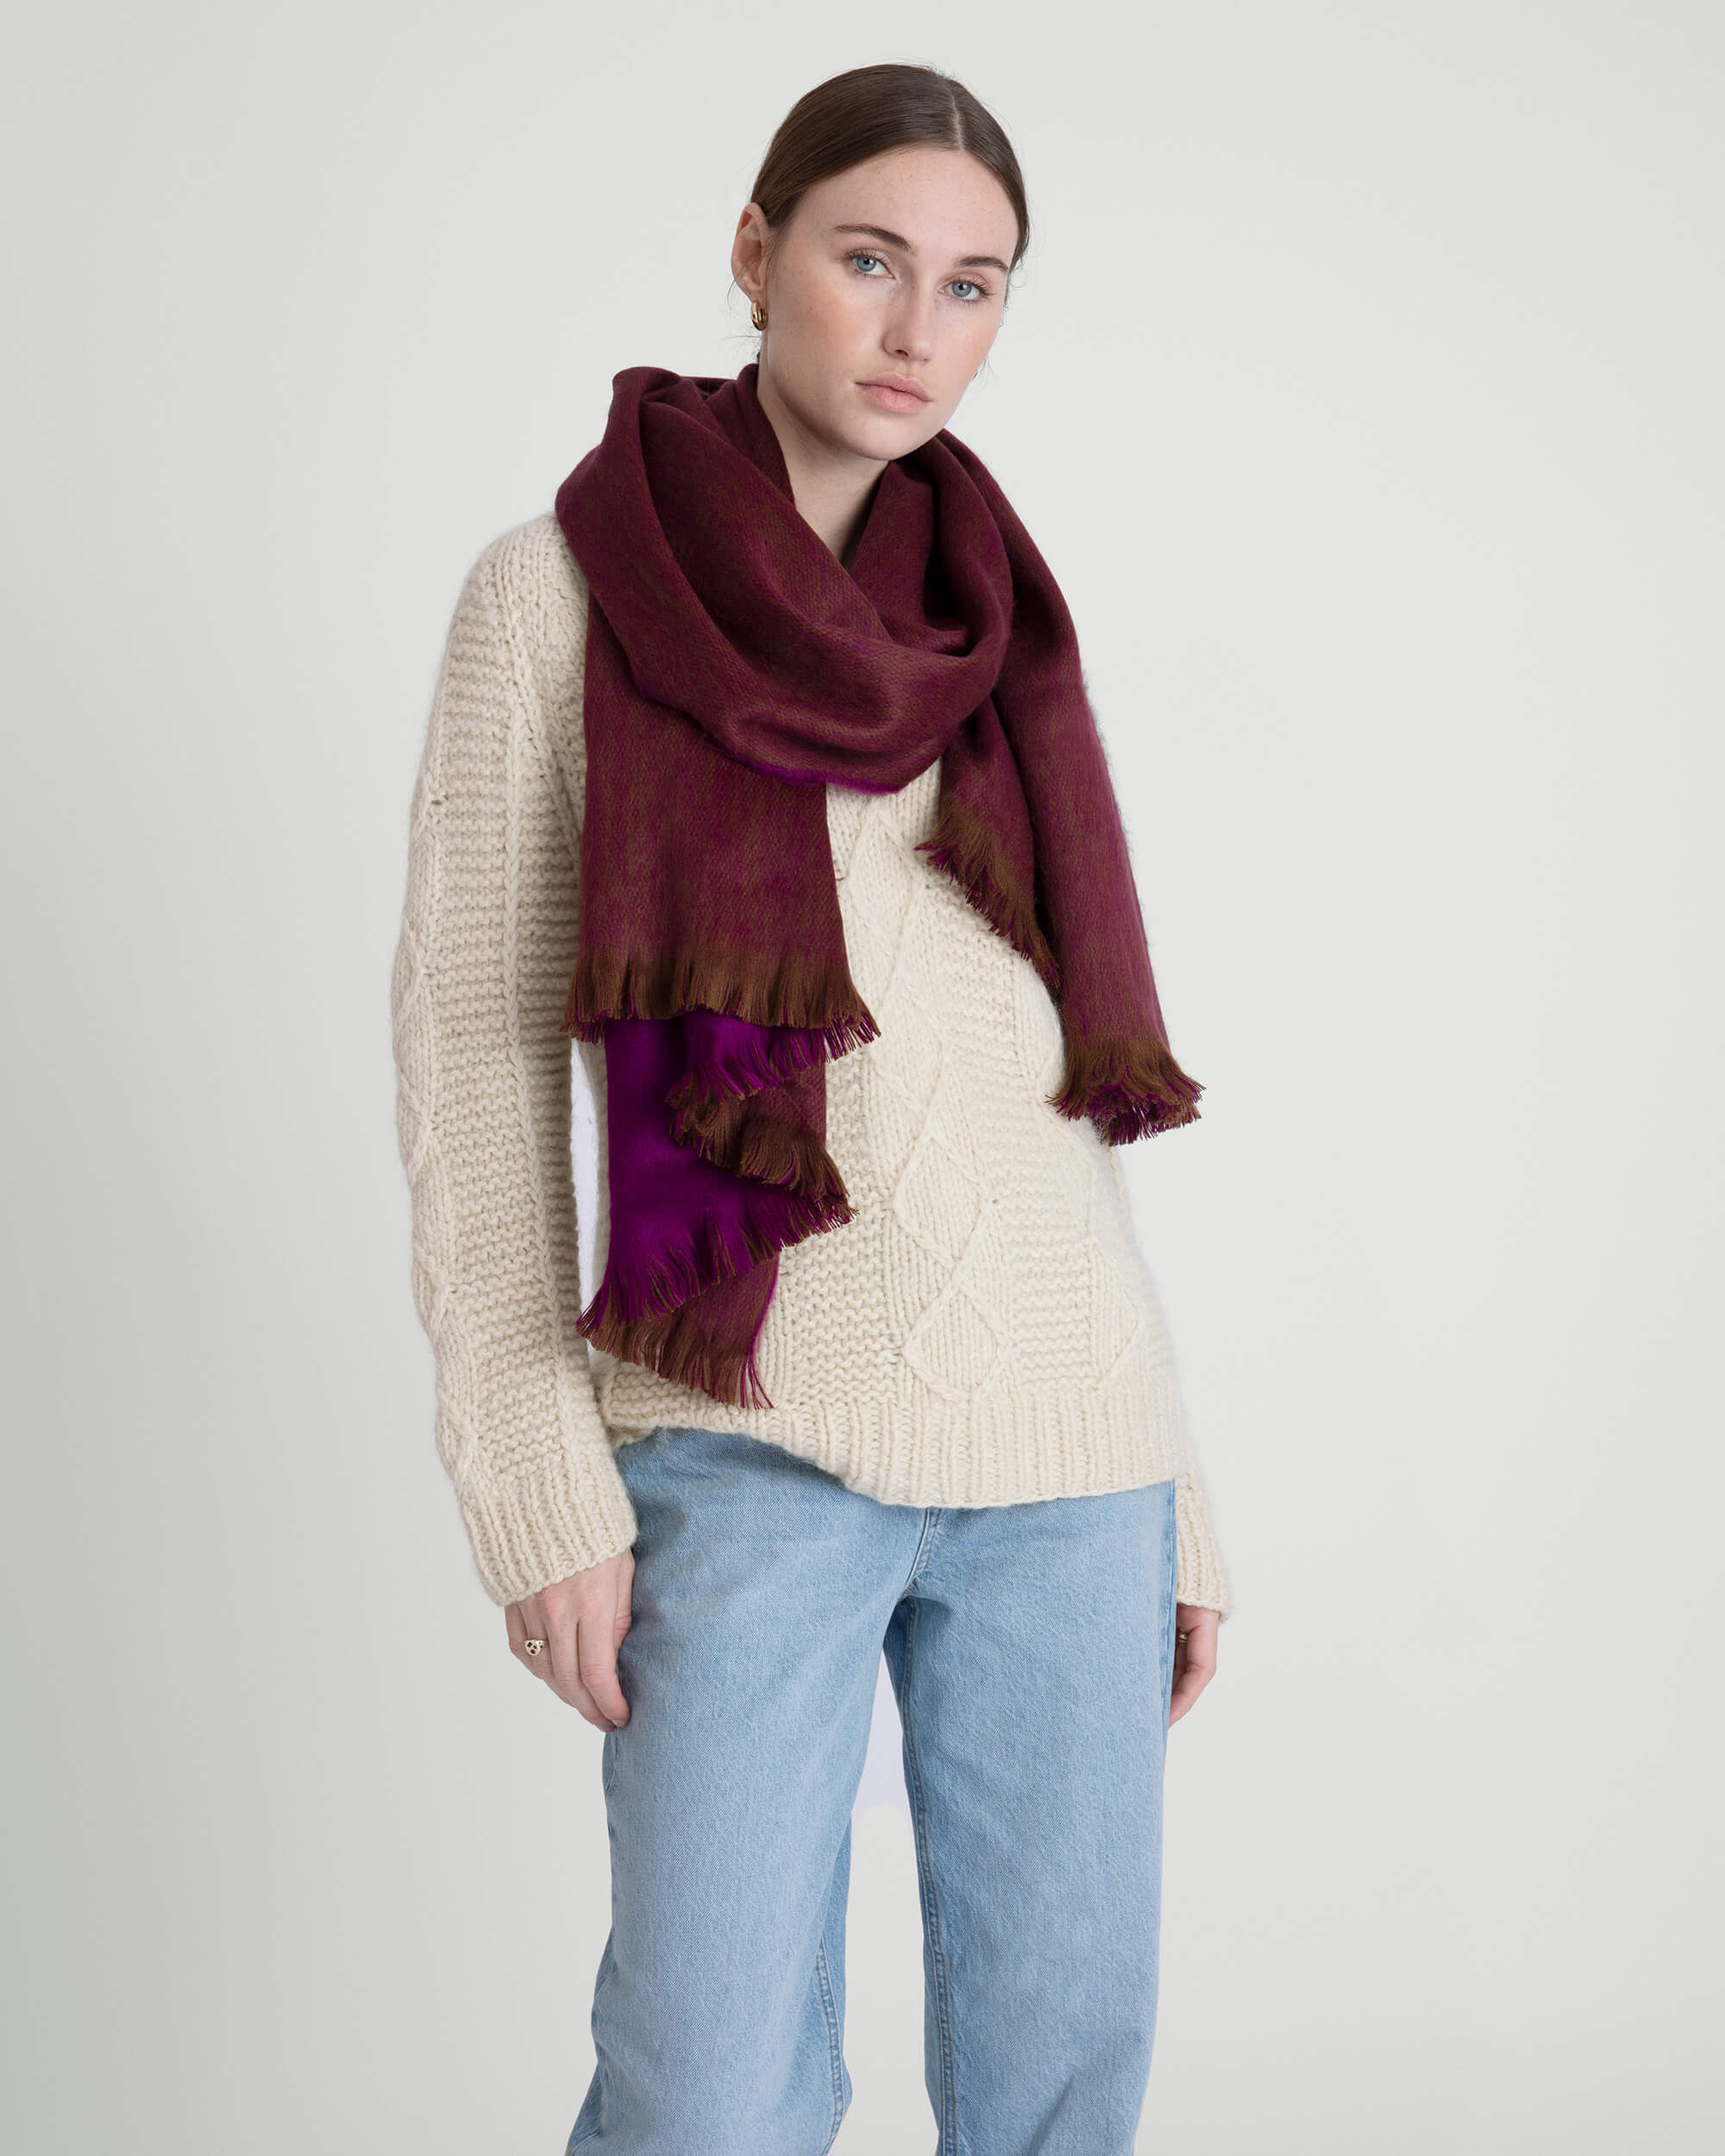 Double Scarf Violet / Chocolate Brown